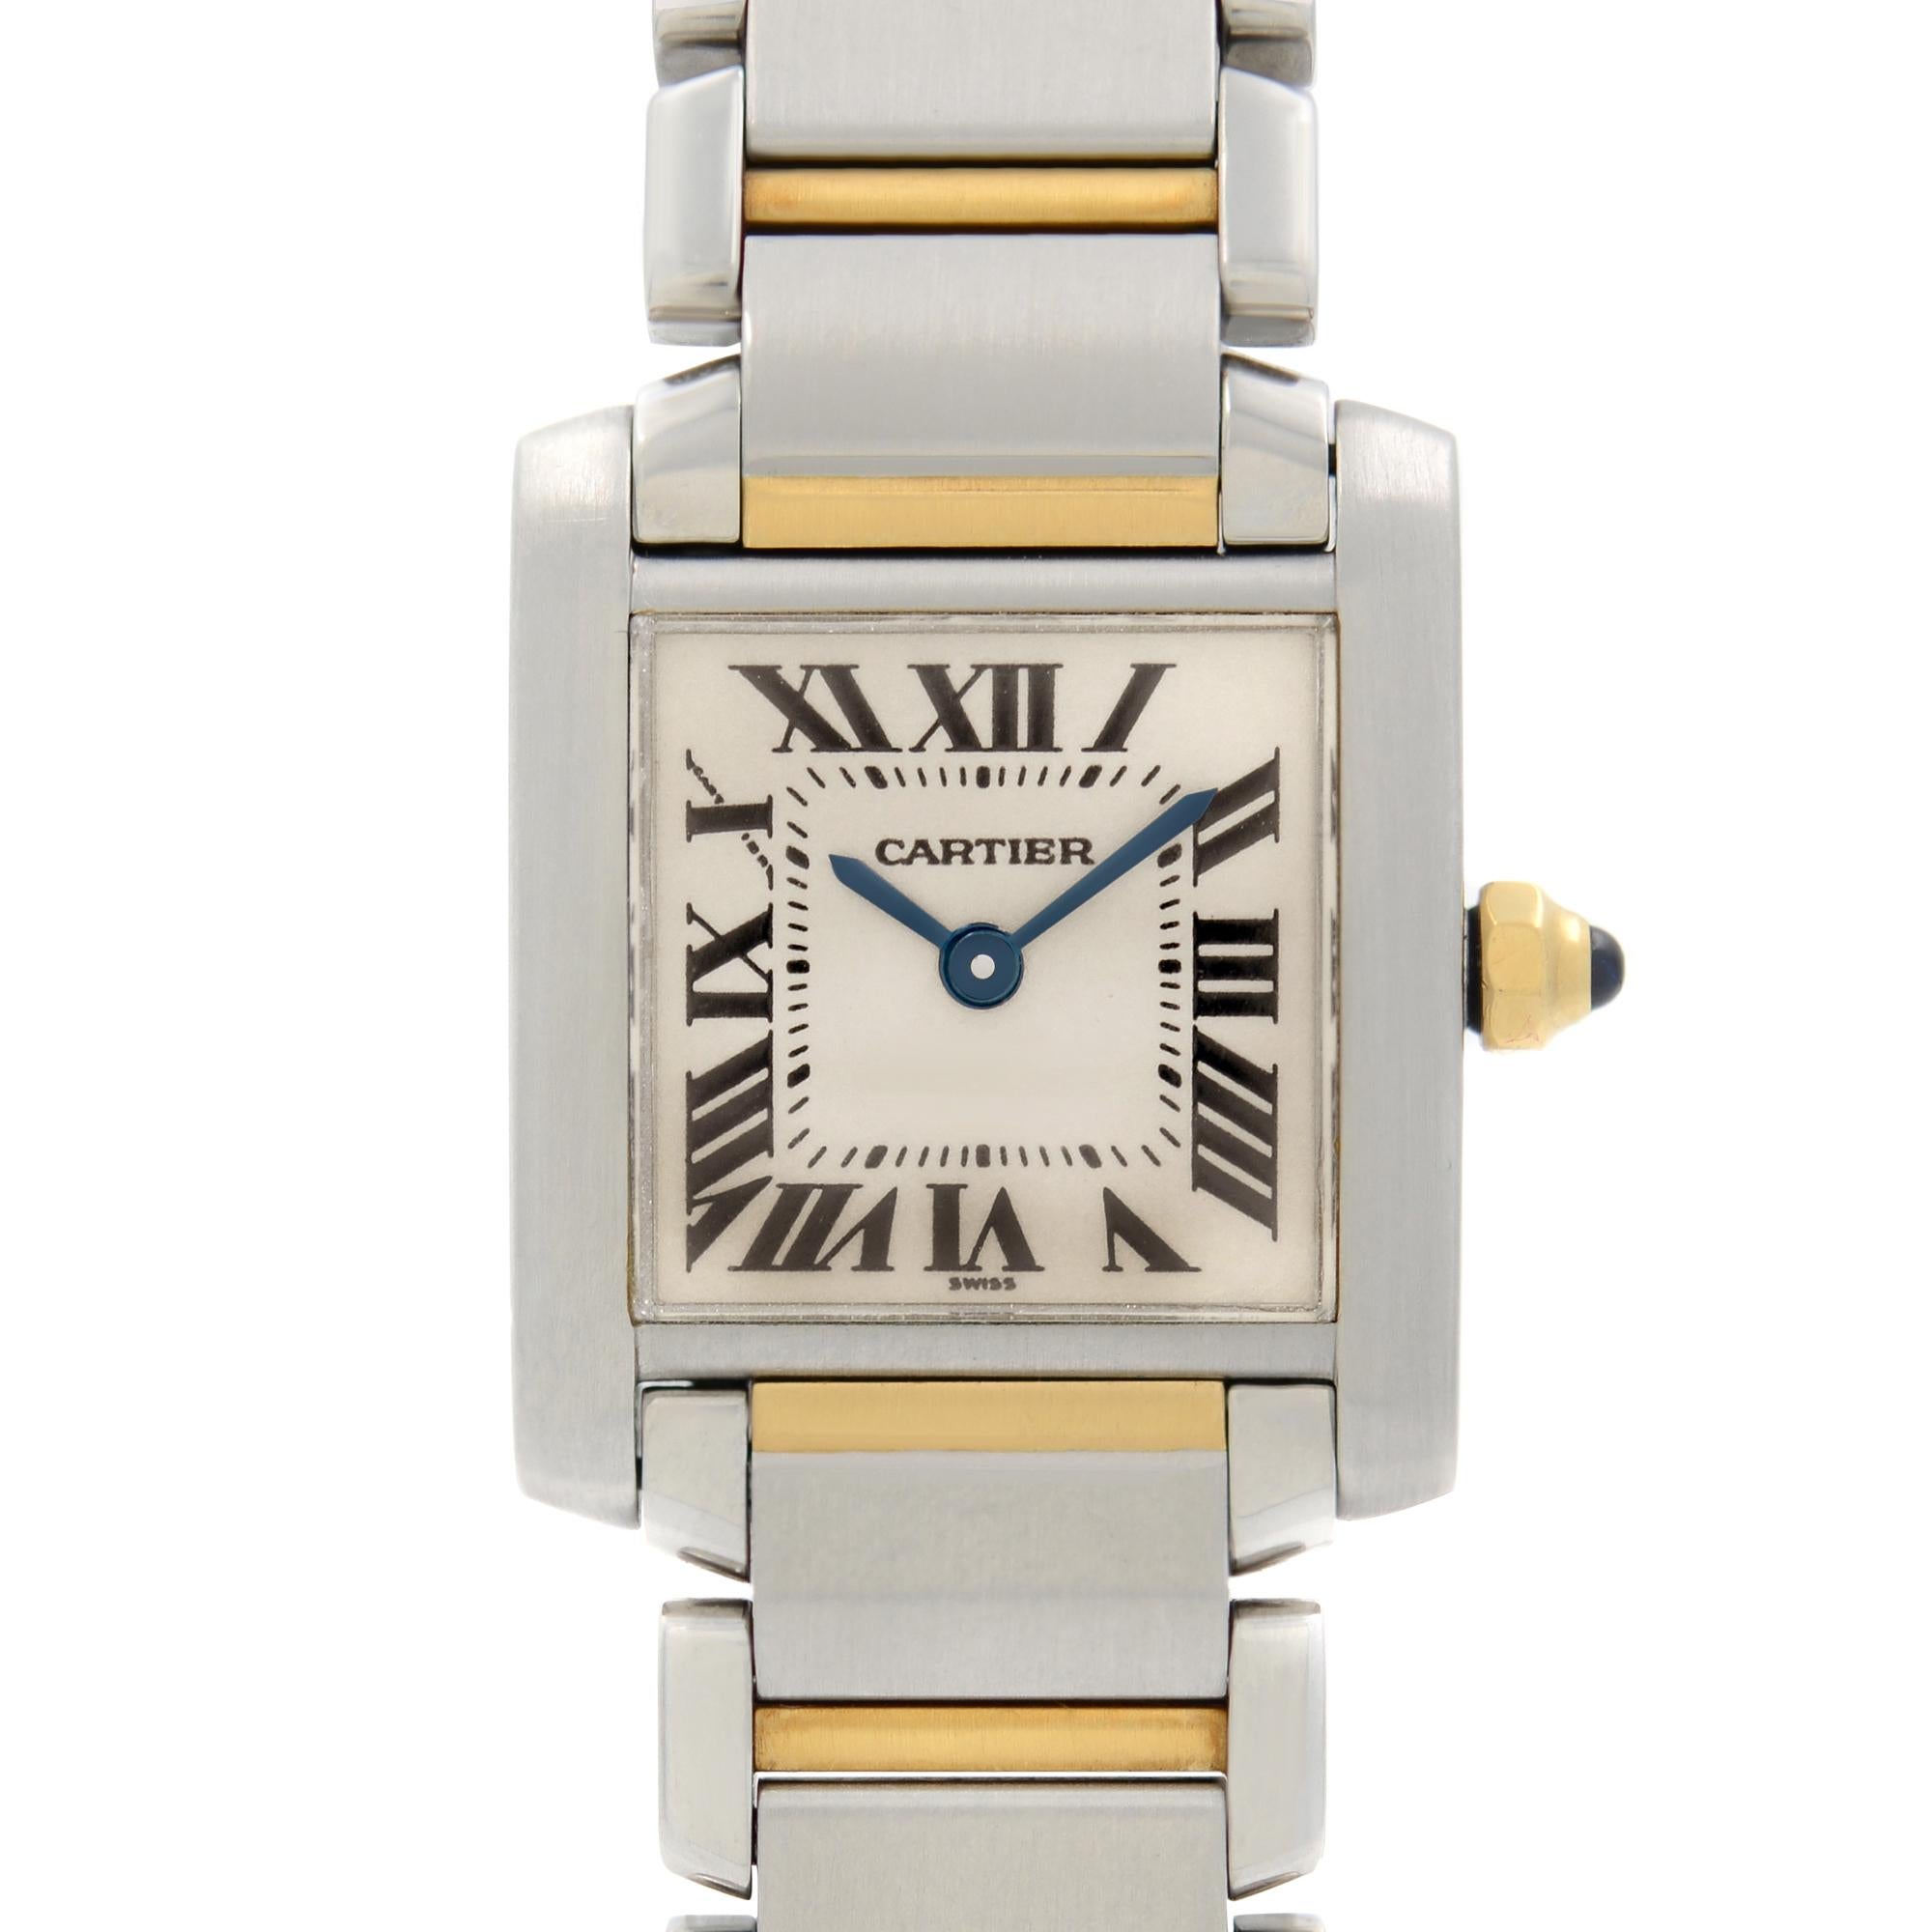 Pre-owned Vintage Cartier Tank Francaise 18K Yellow Gold Steel Cream Dial Quartz Ladies Watch. This Beautiful Timepiece Features: Steel Case, Blued-Steel Sword-Shaped Hands, Sapphire Crystal, Yellow Gold, and Steel Bracelet. No Original Box and